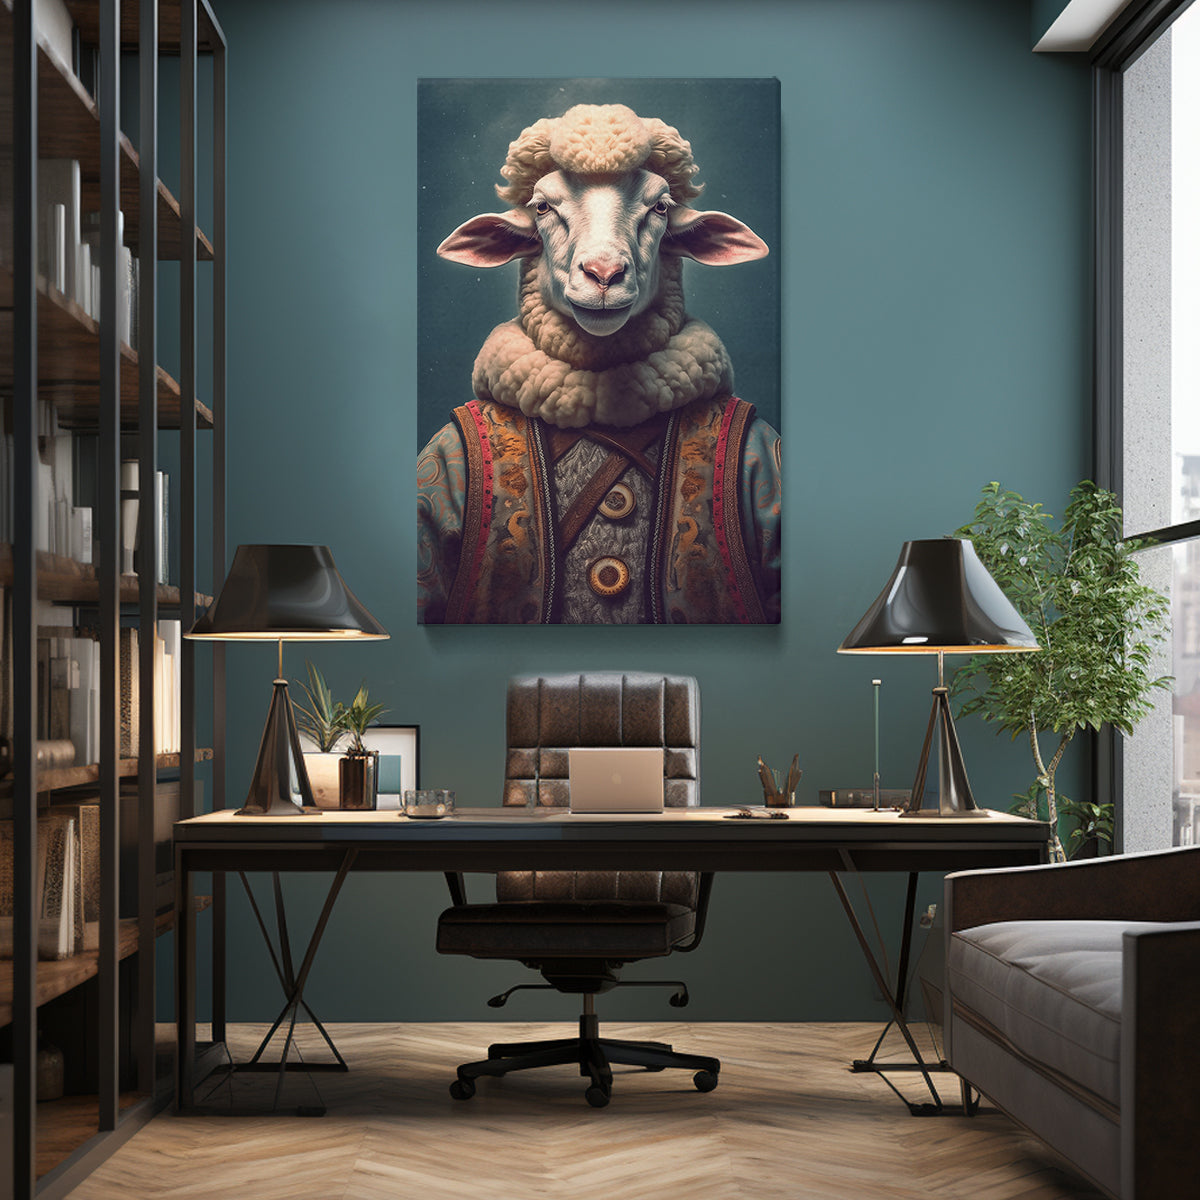 Sheep in Traditional Attire Canvas Prints Artesty   